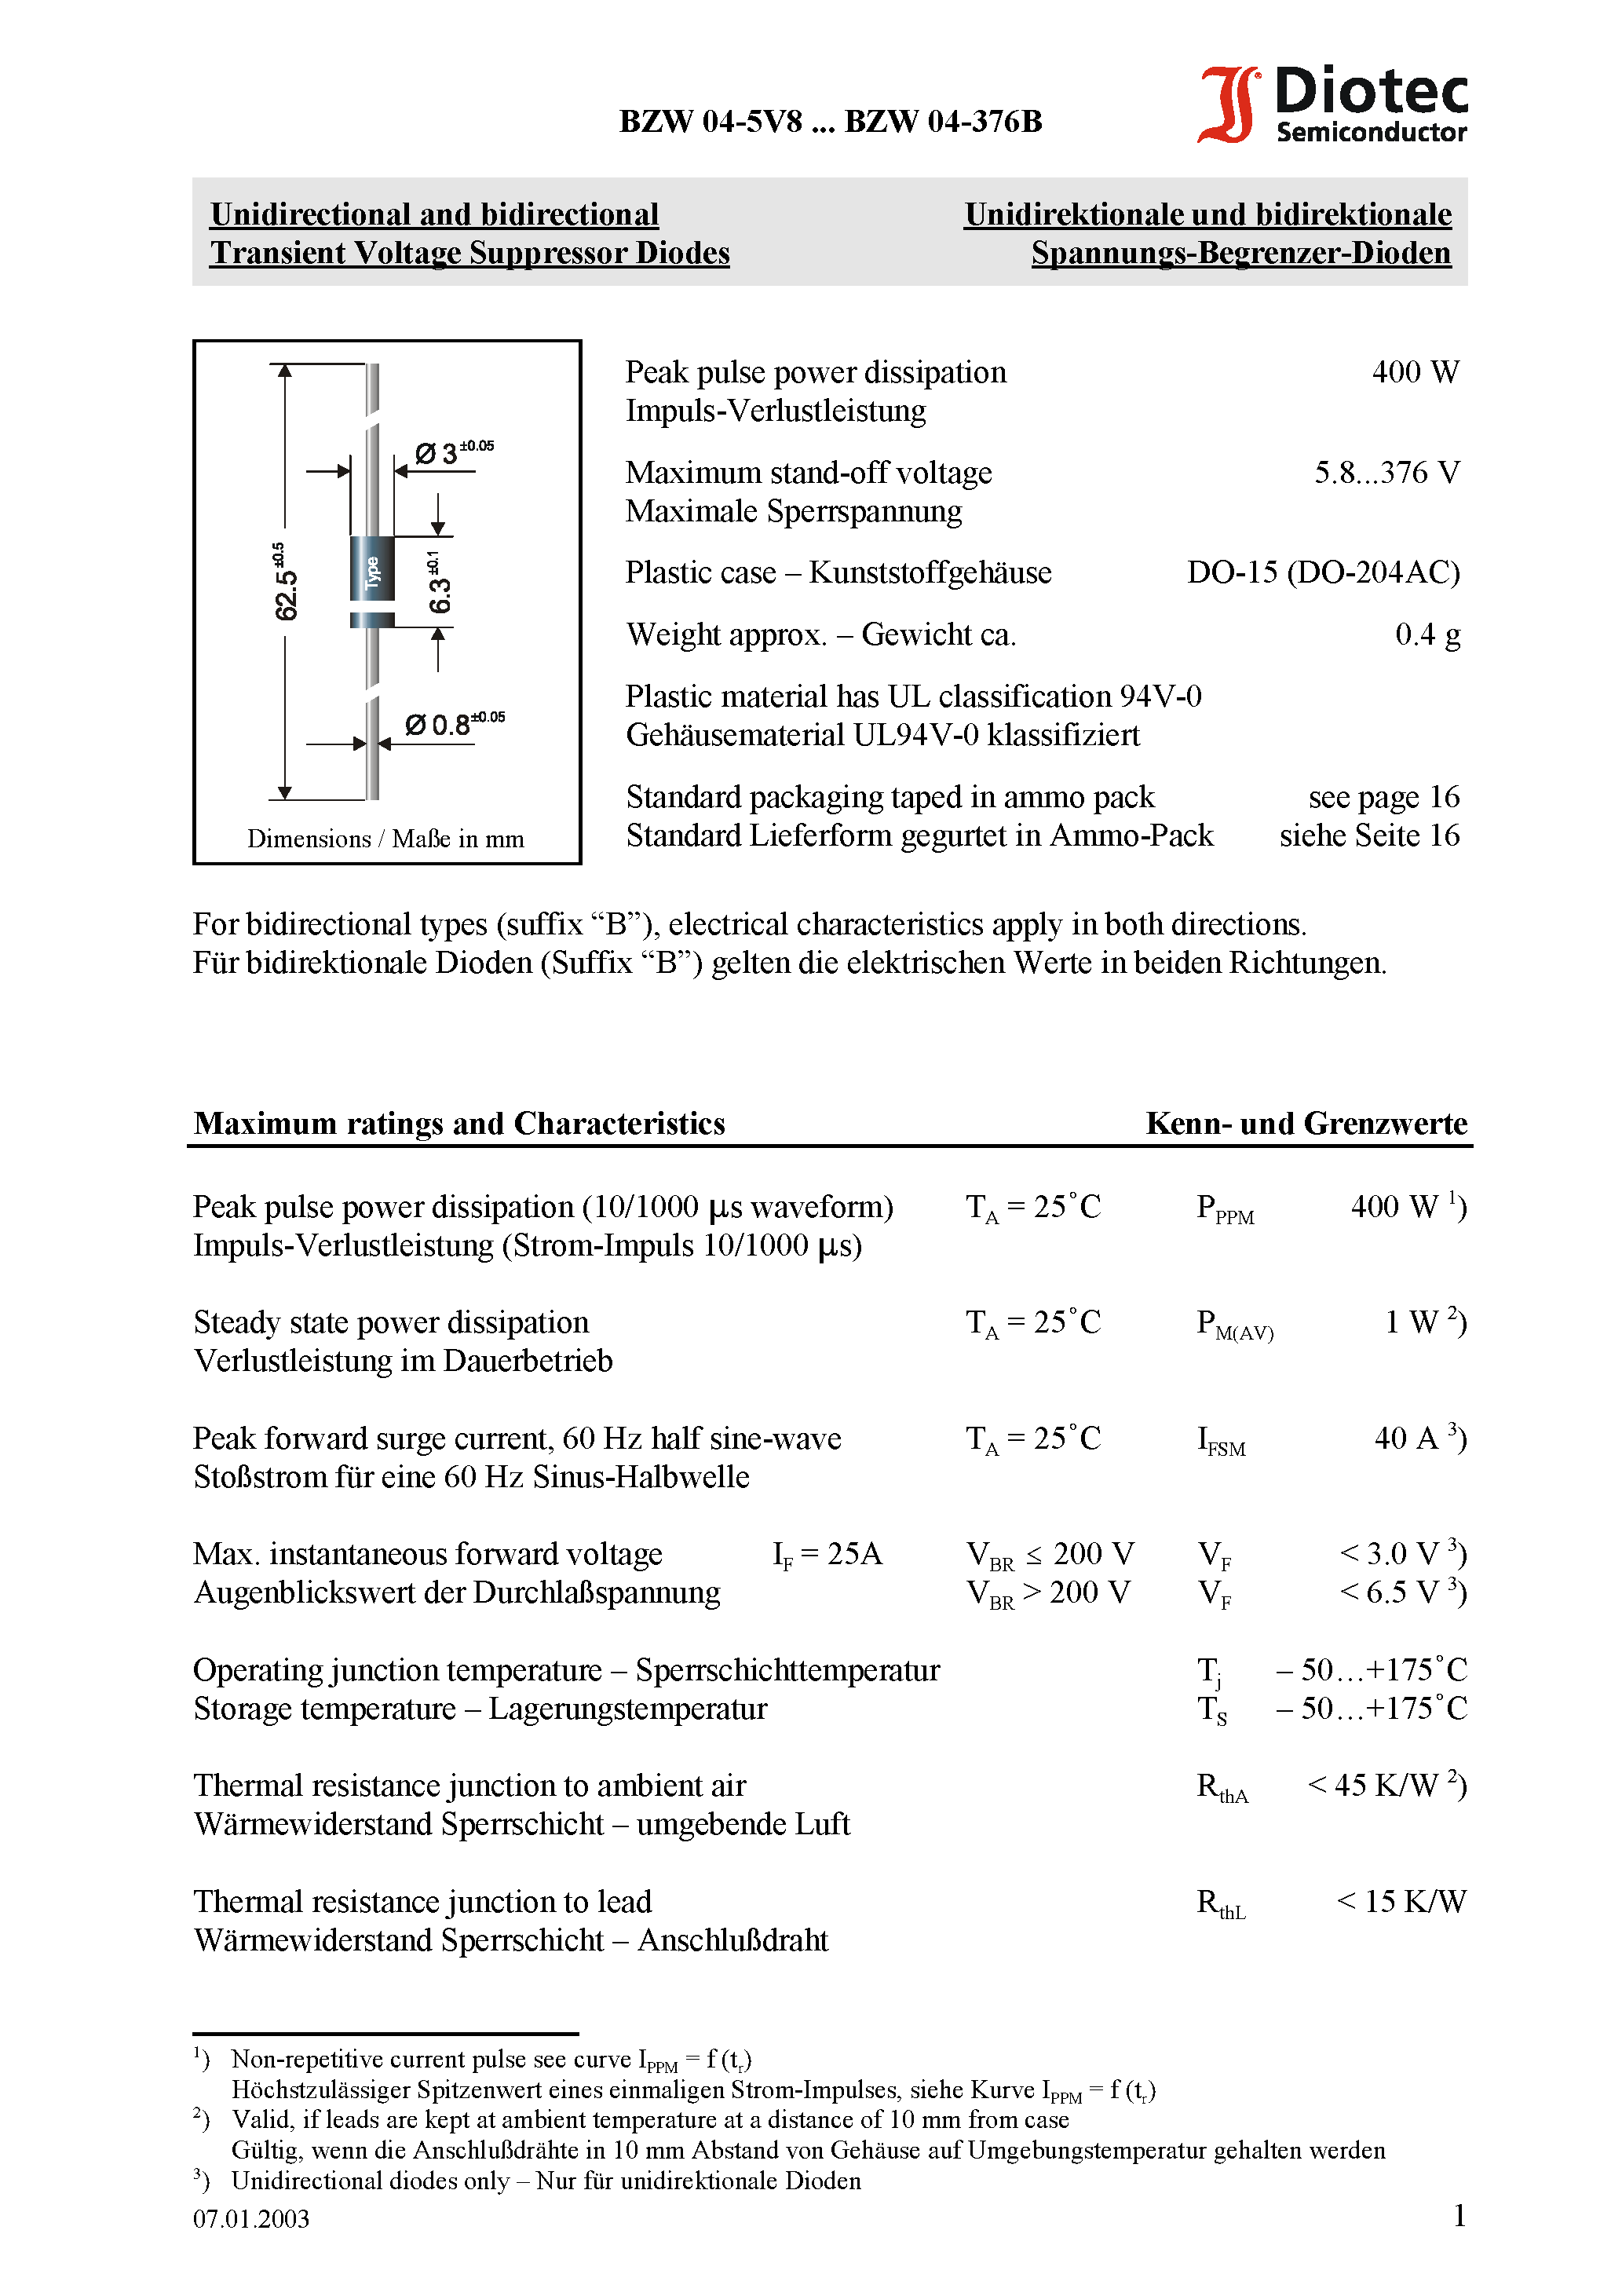 Datasheet BZW04-136 - Unidirectional and bidirectional Transient Voltage Suppressor Diodes page 1